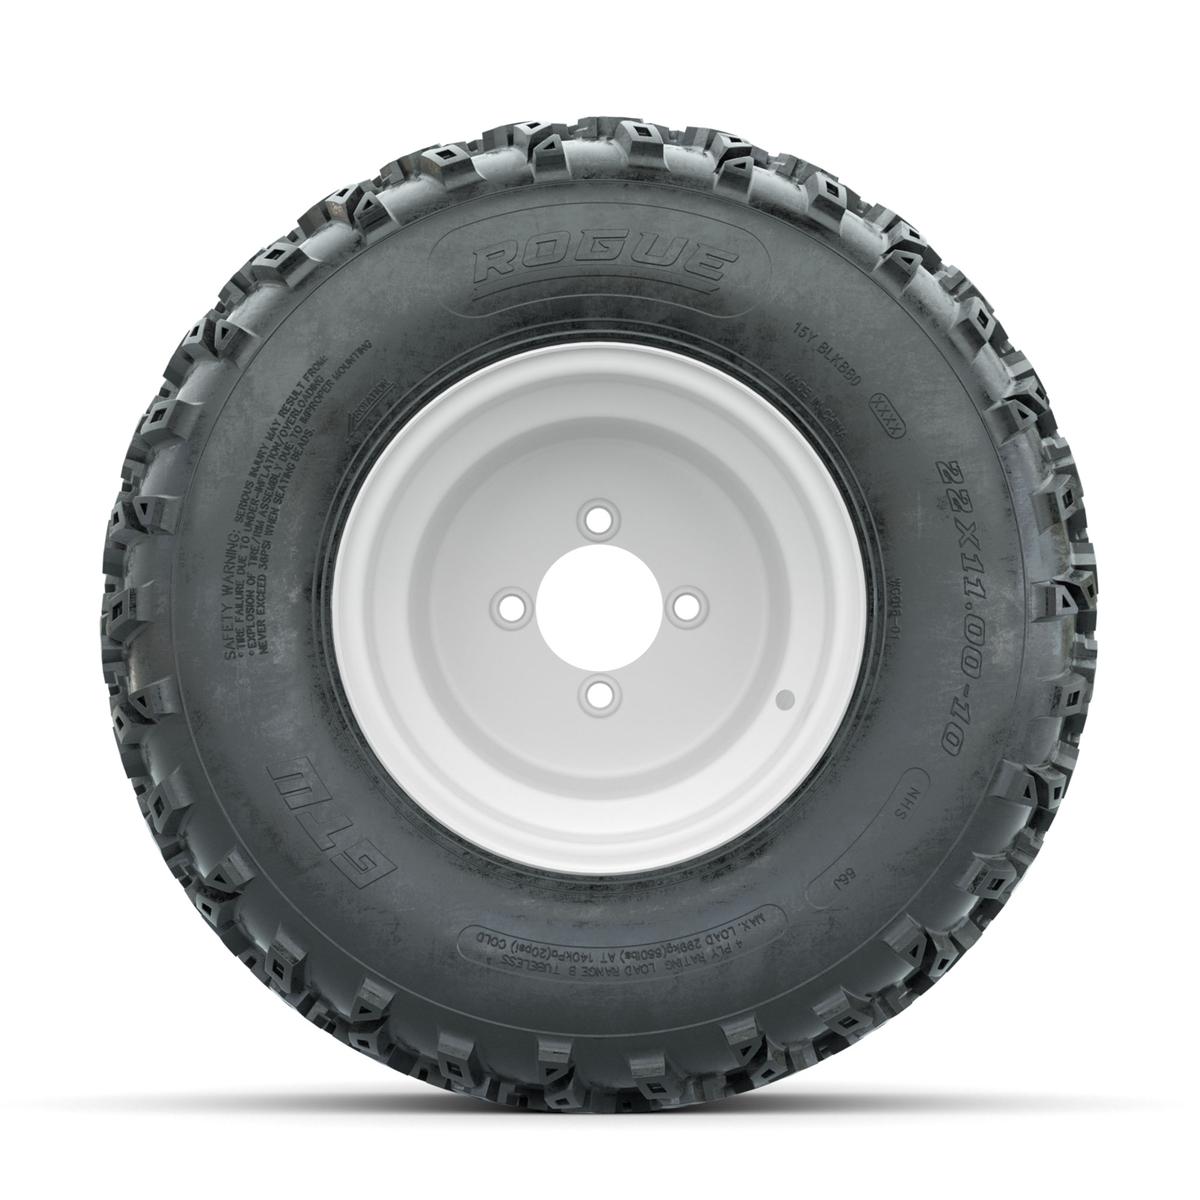 GTW Steel White 3:5 Offset 10 in Wheels with 22x11.00-10 Rogue All Terrain Tires – Full Set